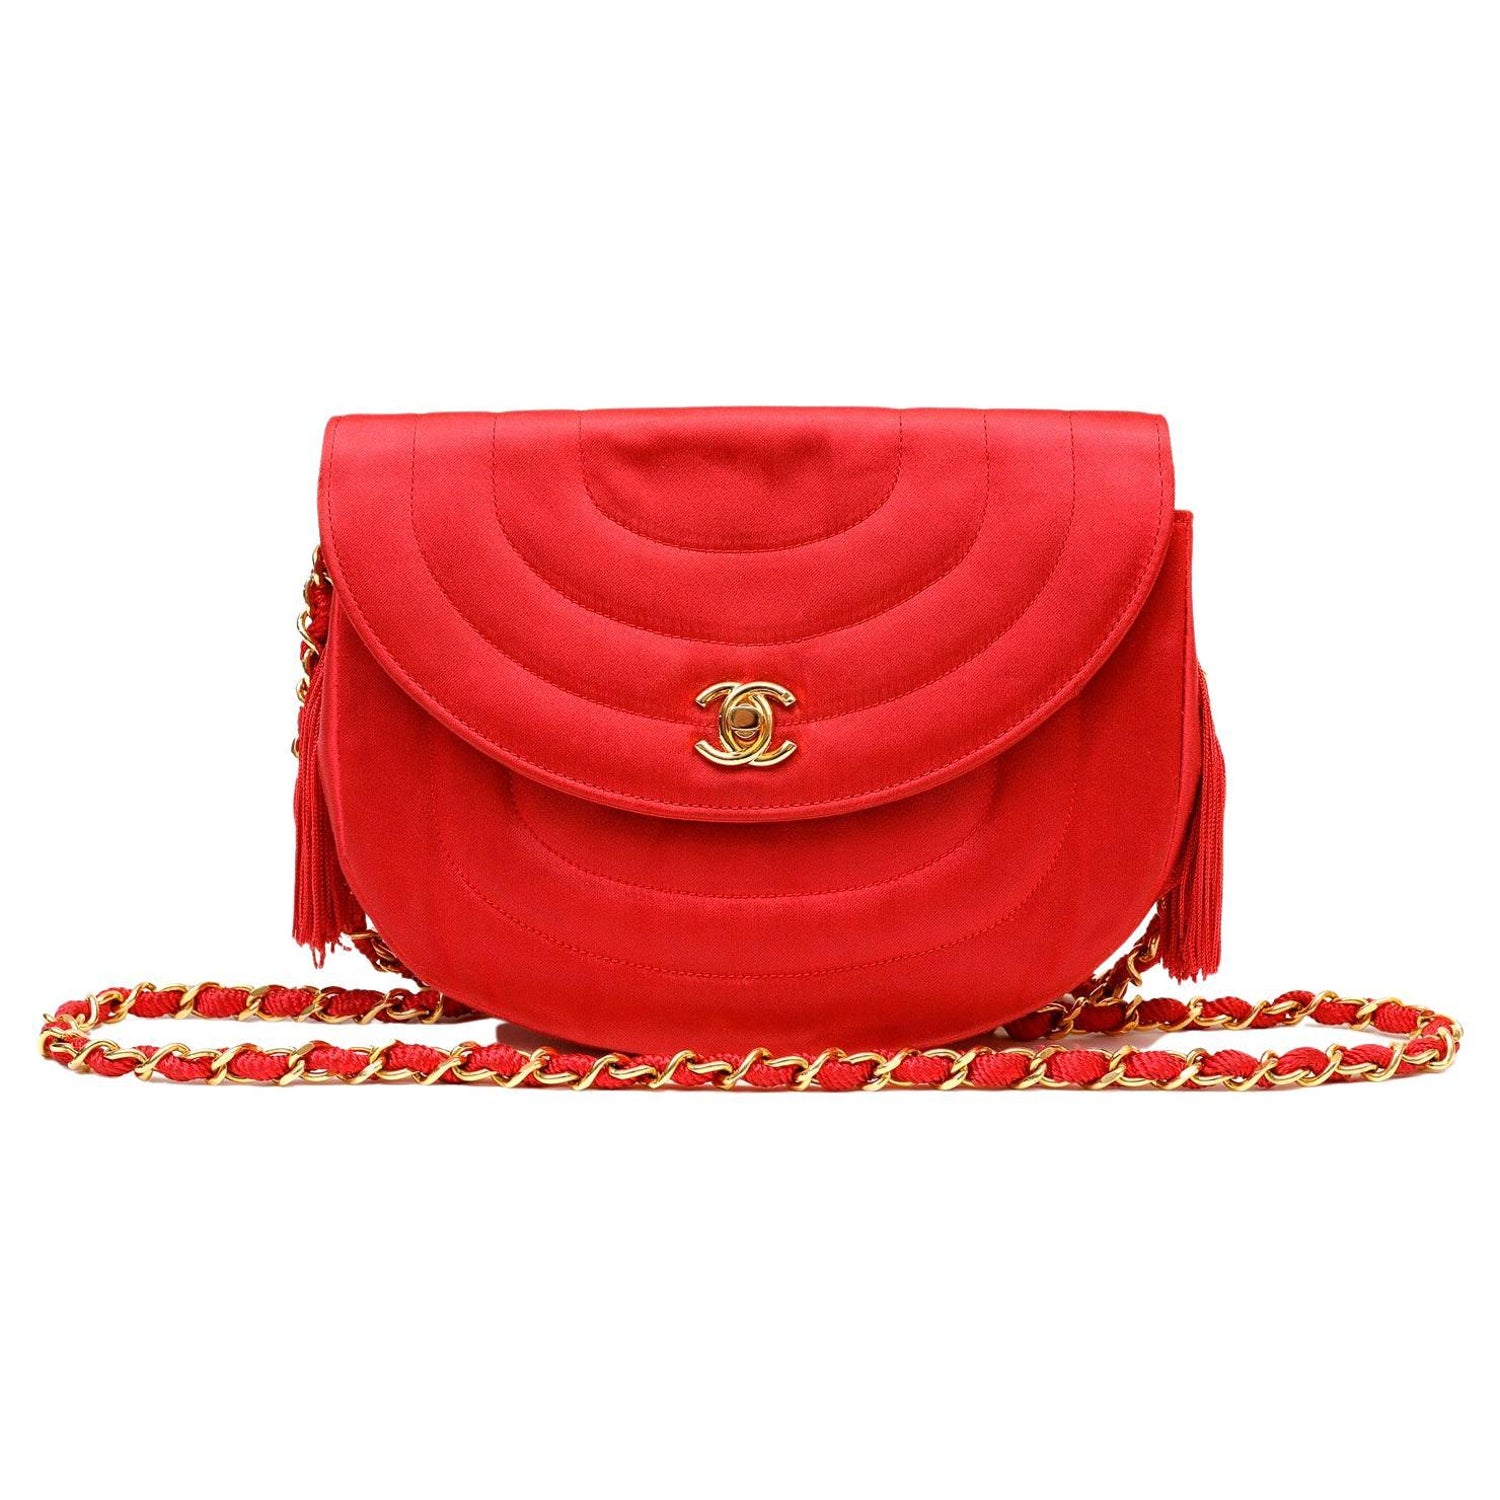 CHANEL Pre-Owned Vintage 1970s Bag - Farfetch